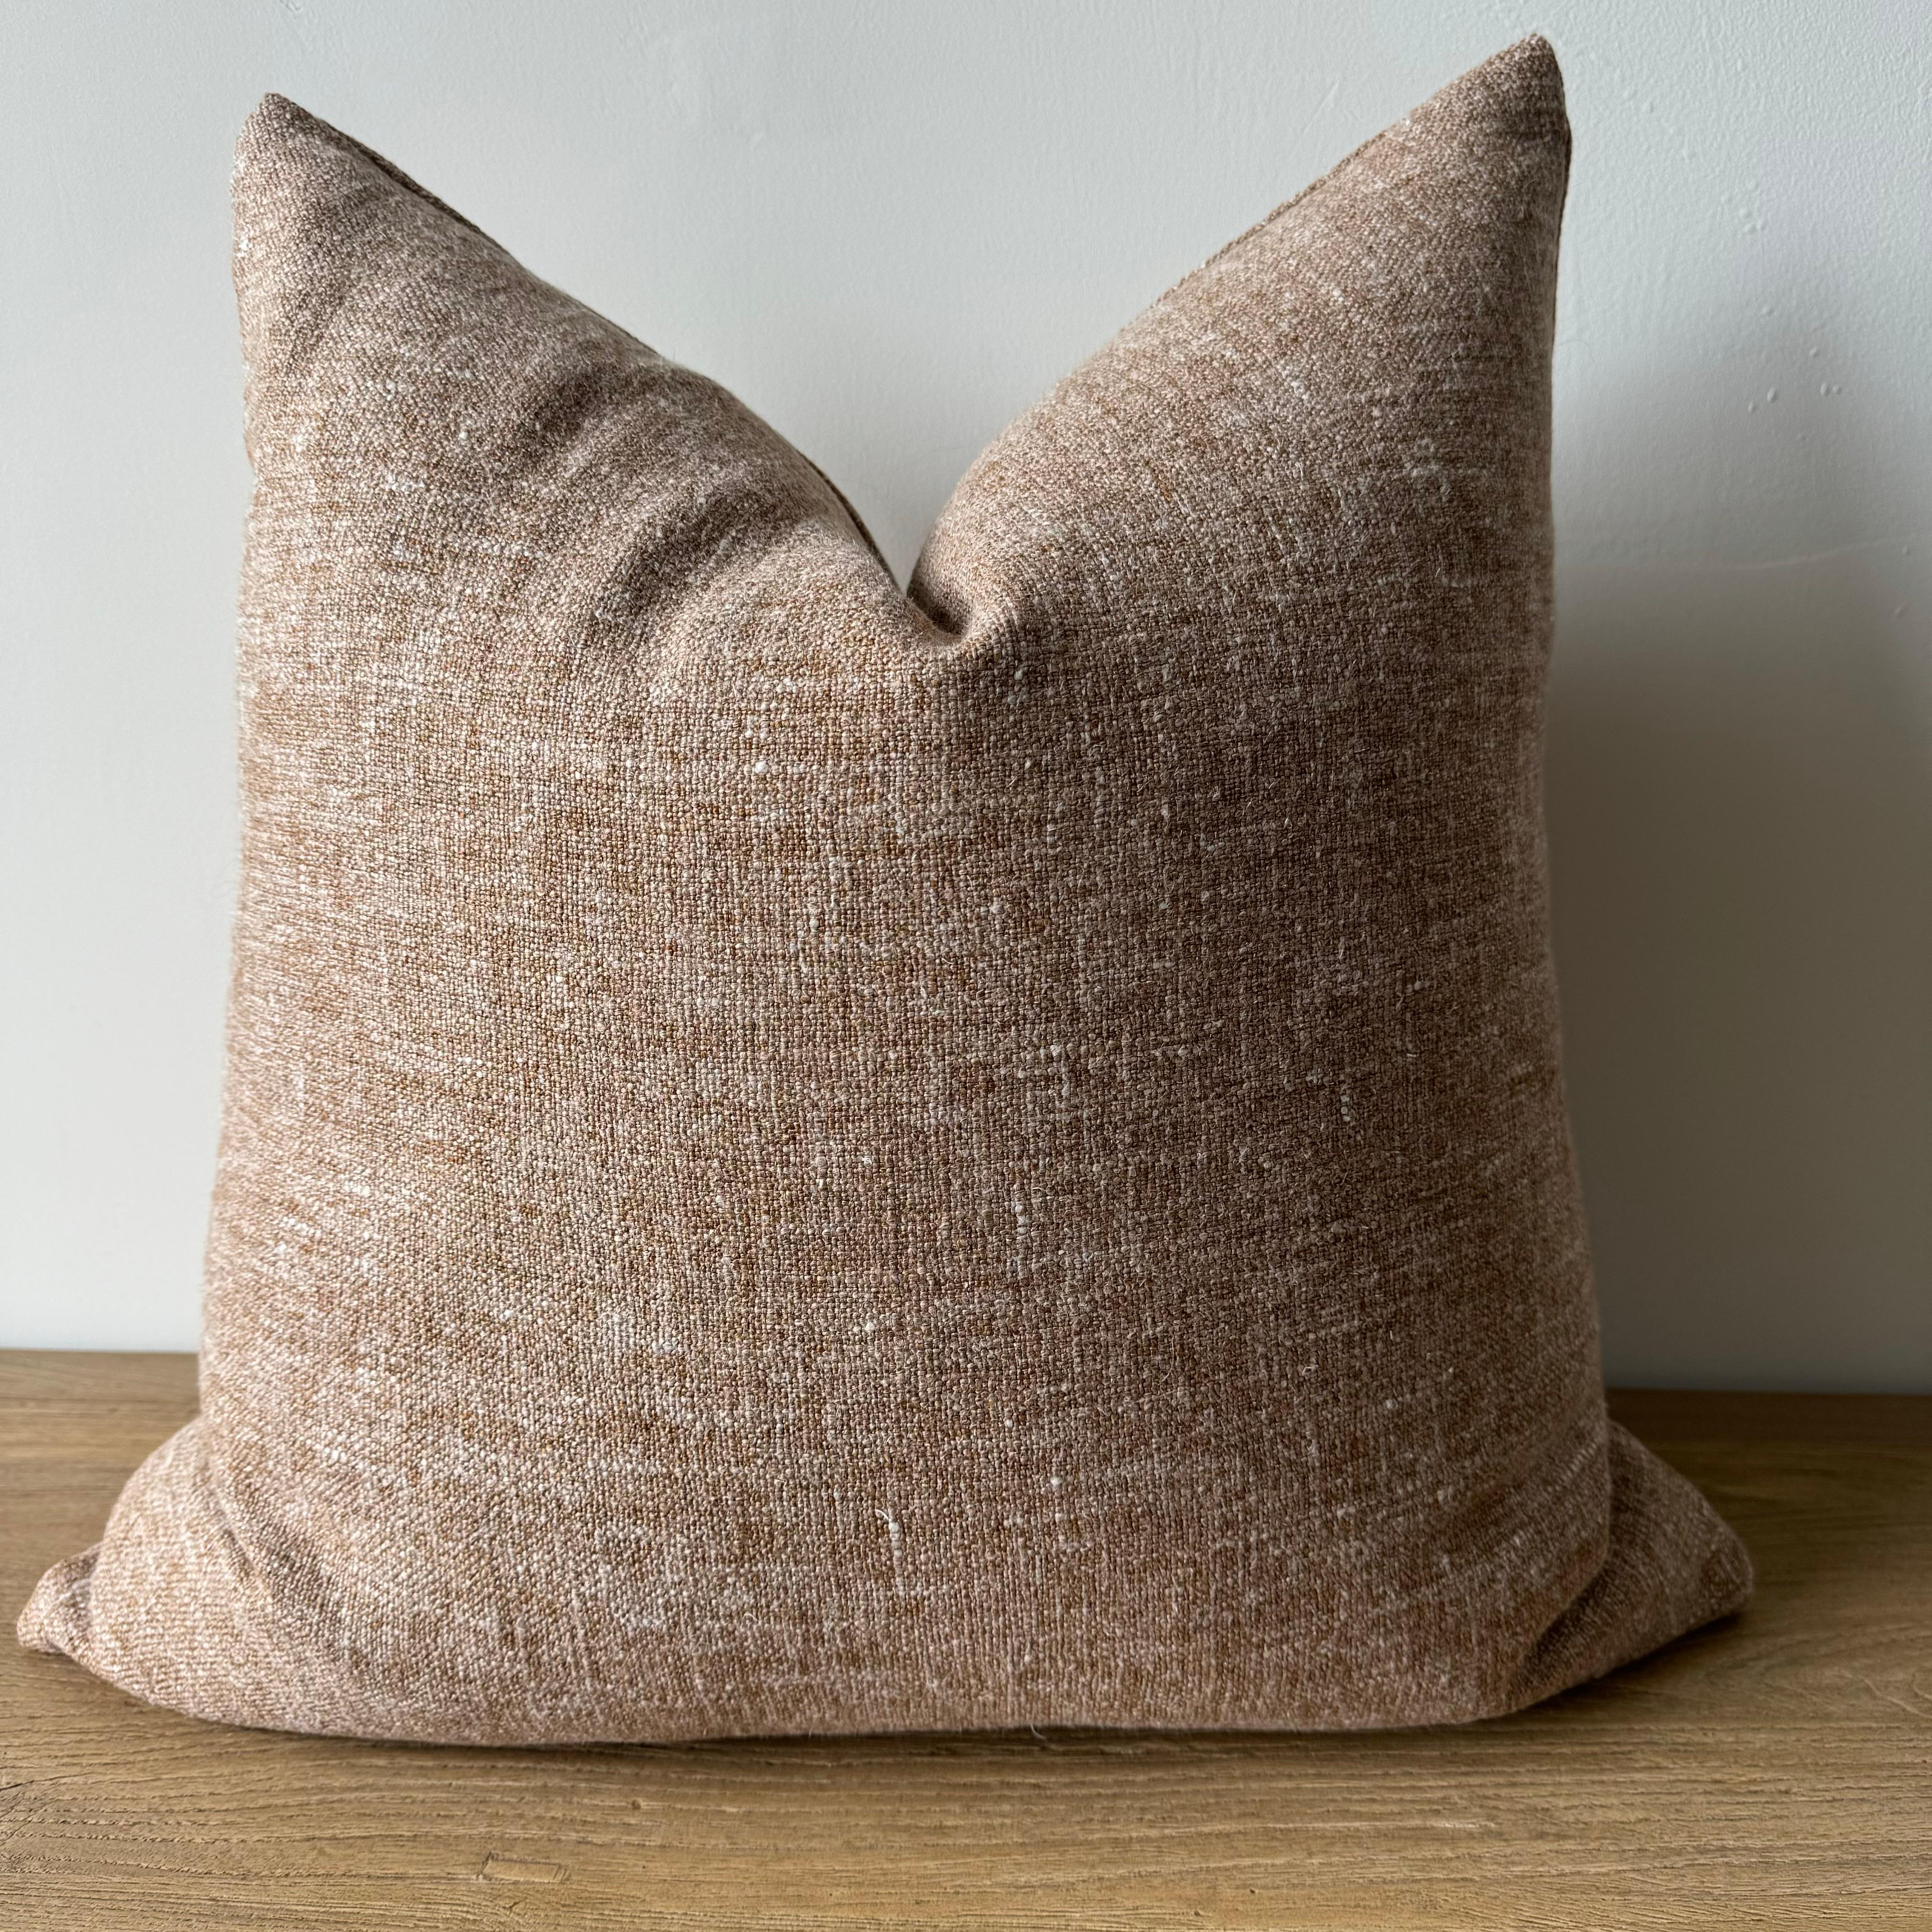 Bejmat Brown with hues of terracotta and natural flax oatmeal woven fibers in a stonewash finish create this luxurious soft pillow. Sewn with an antique brass zipper closure and overlocked edges.
Includes a down/ feather insert.
Size: 22 x 22
-52%